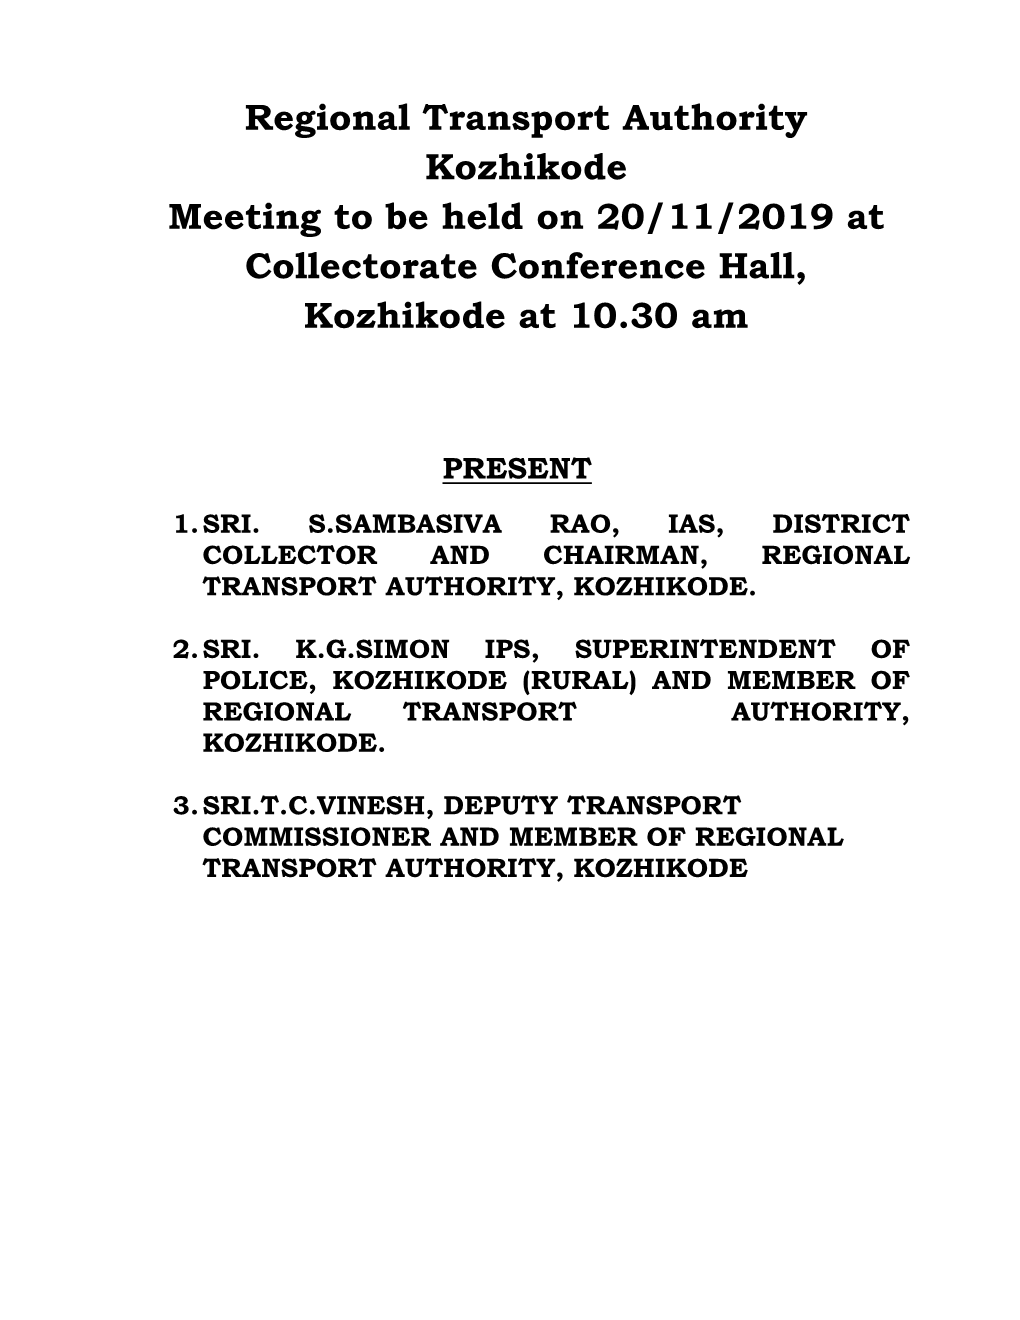 Regional Transport Authority Kozhikode Meeting to Be Held on 20/11/2019 at Collectorate Conference Hall, Kozhikode at 10.30 Am